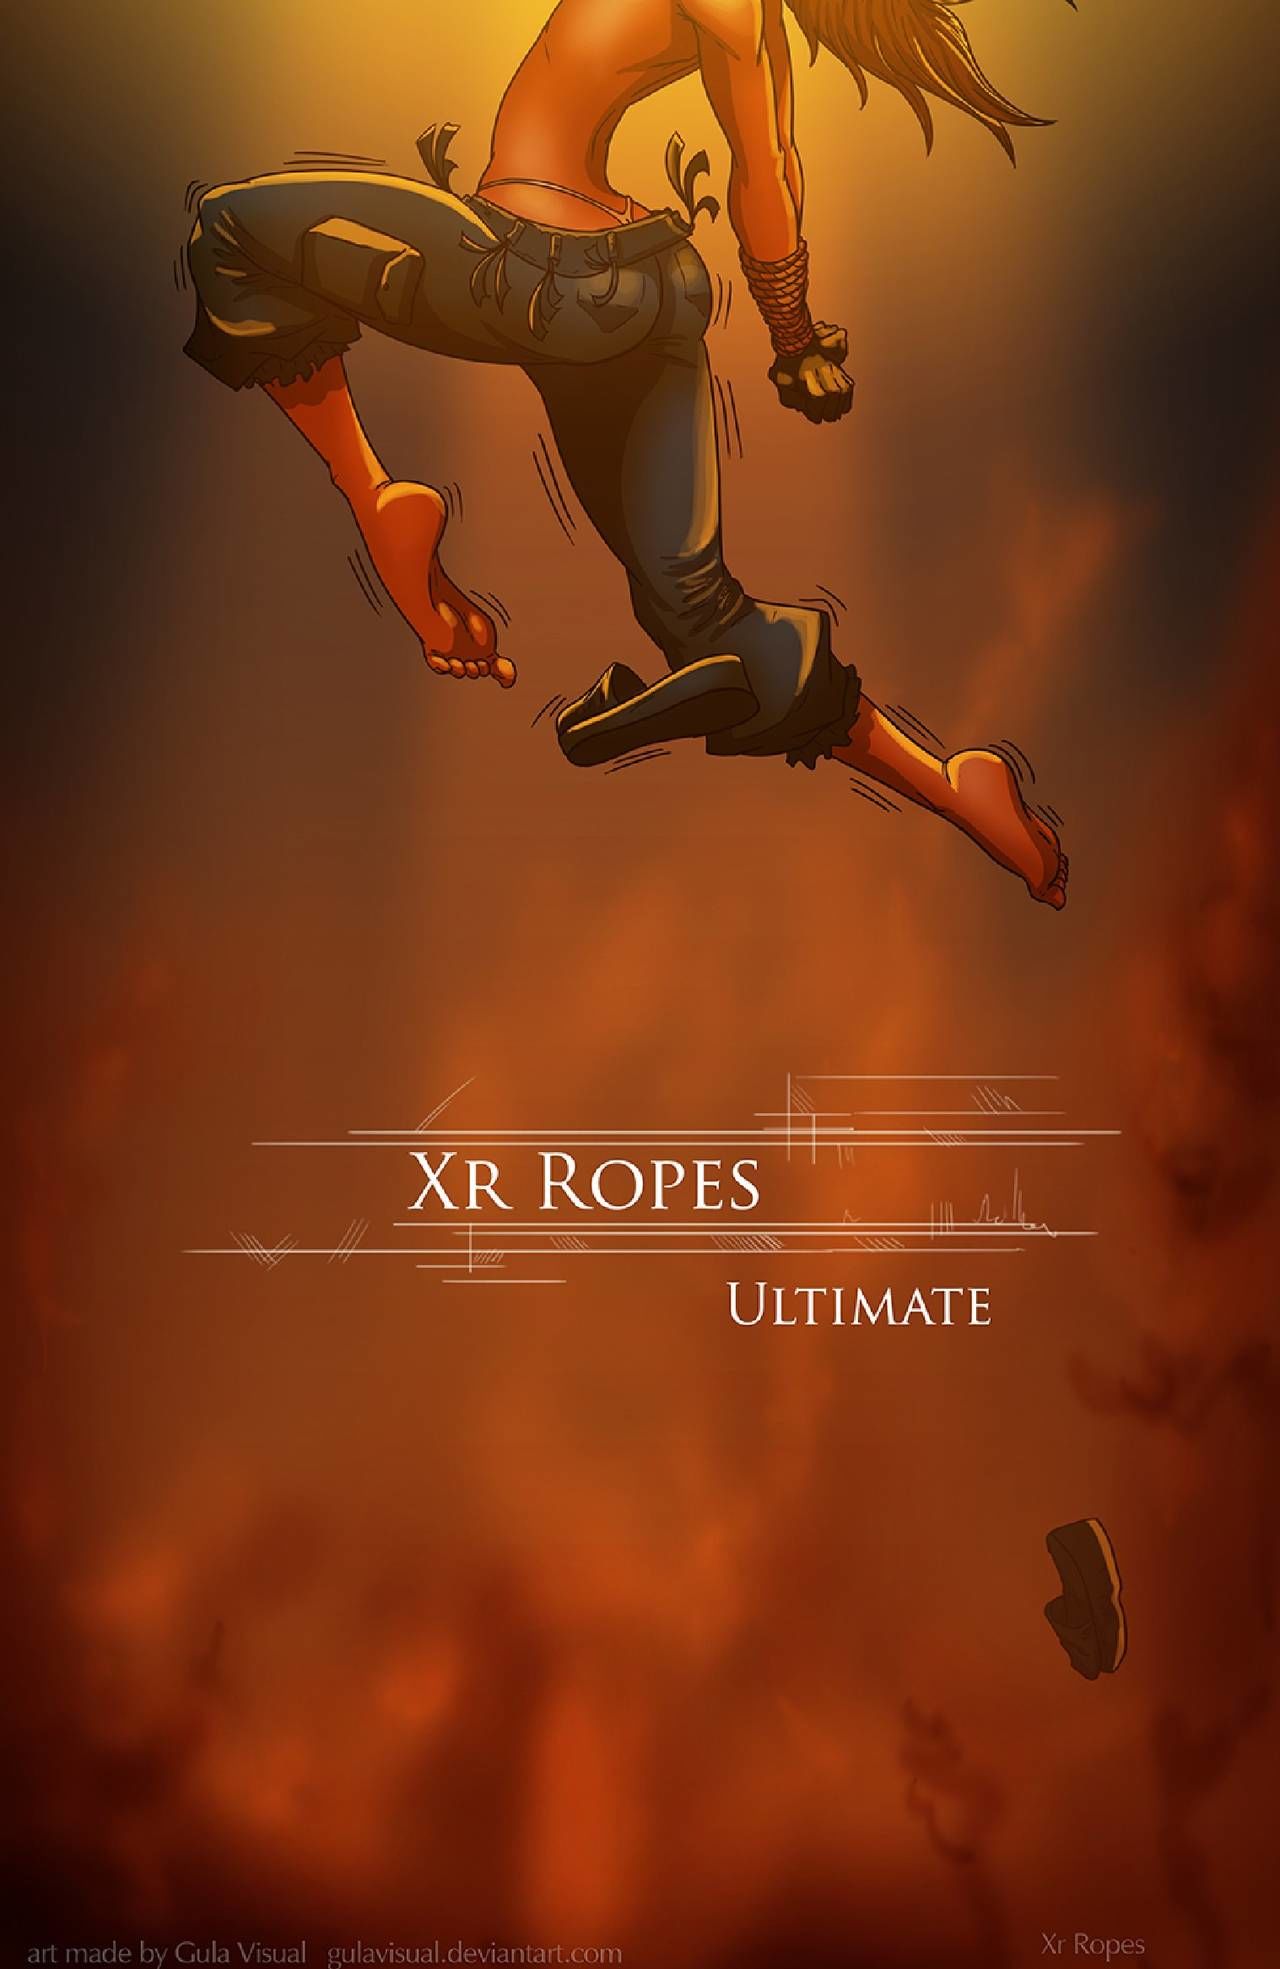 XR Ropes Ultimate Gulavisual page 1